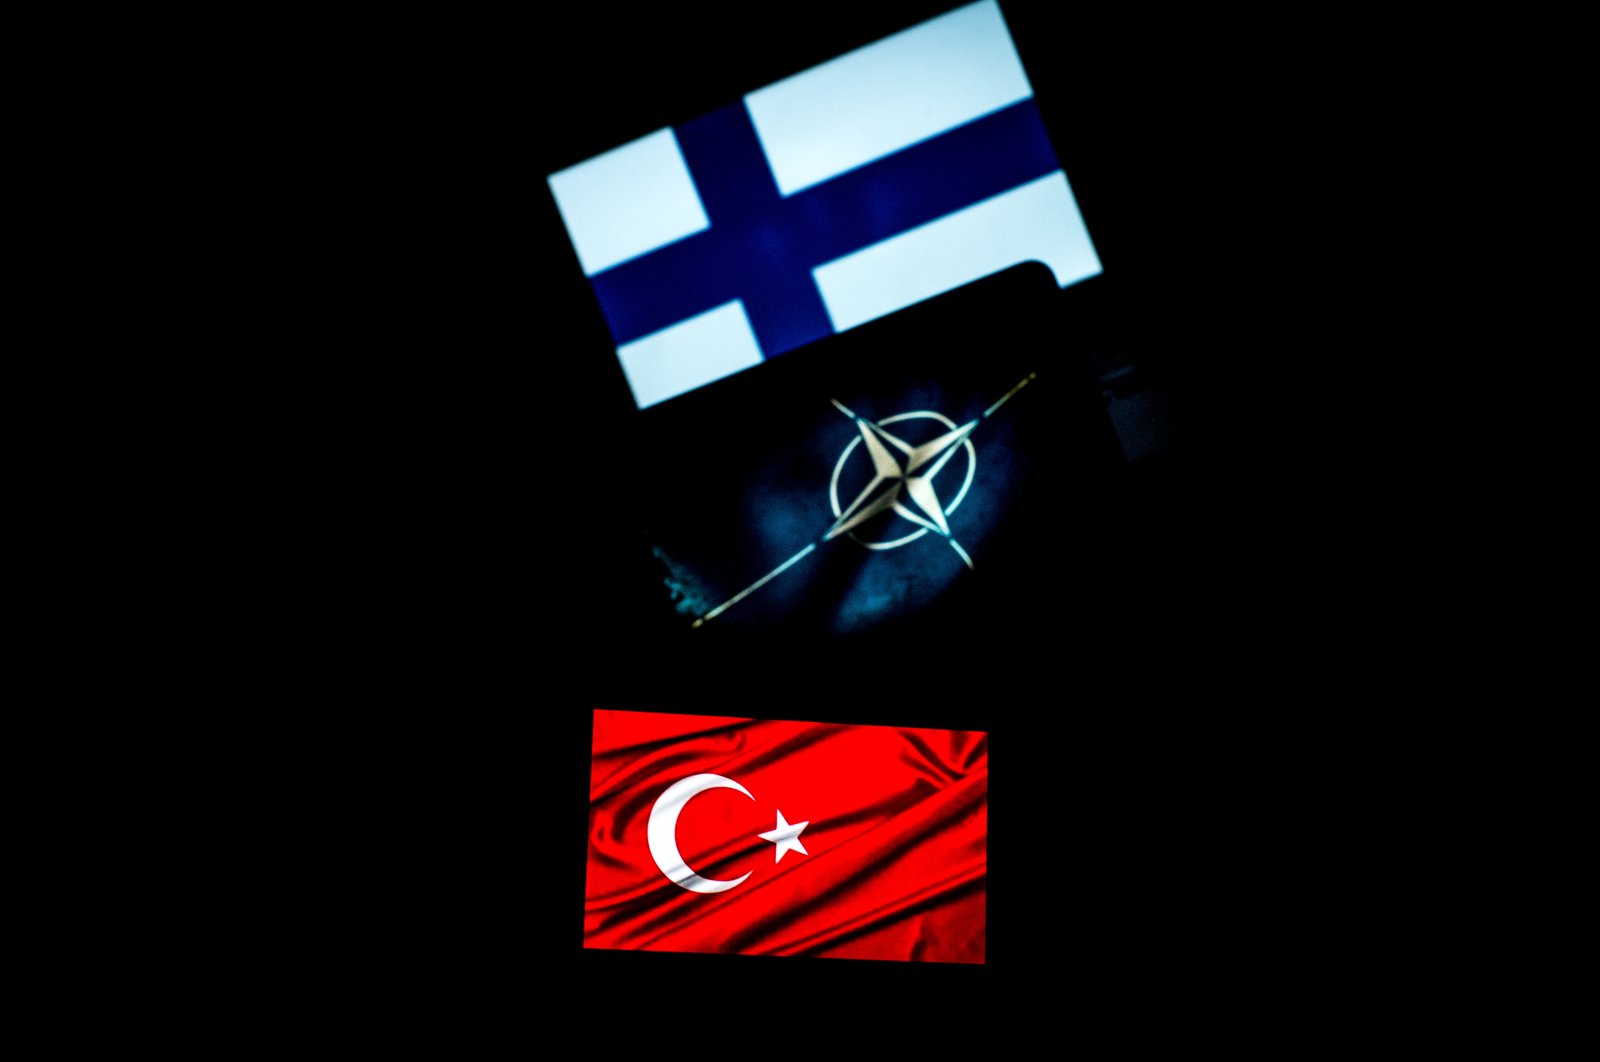 Photographic compositions depicting the flags of Finland, Türkiye and NATO displayed on the screens of personal computers and smartphones in Rome, Italy, May 14, 2022. (Reuters File Photo)